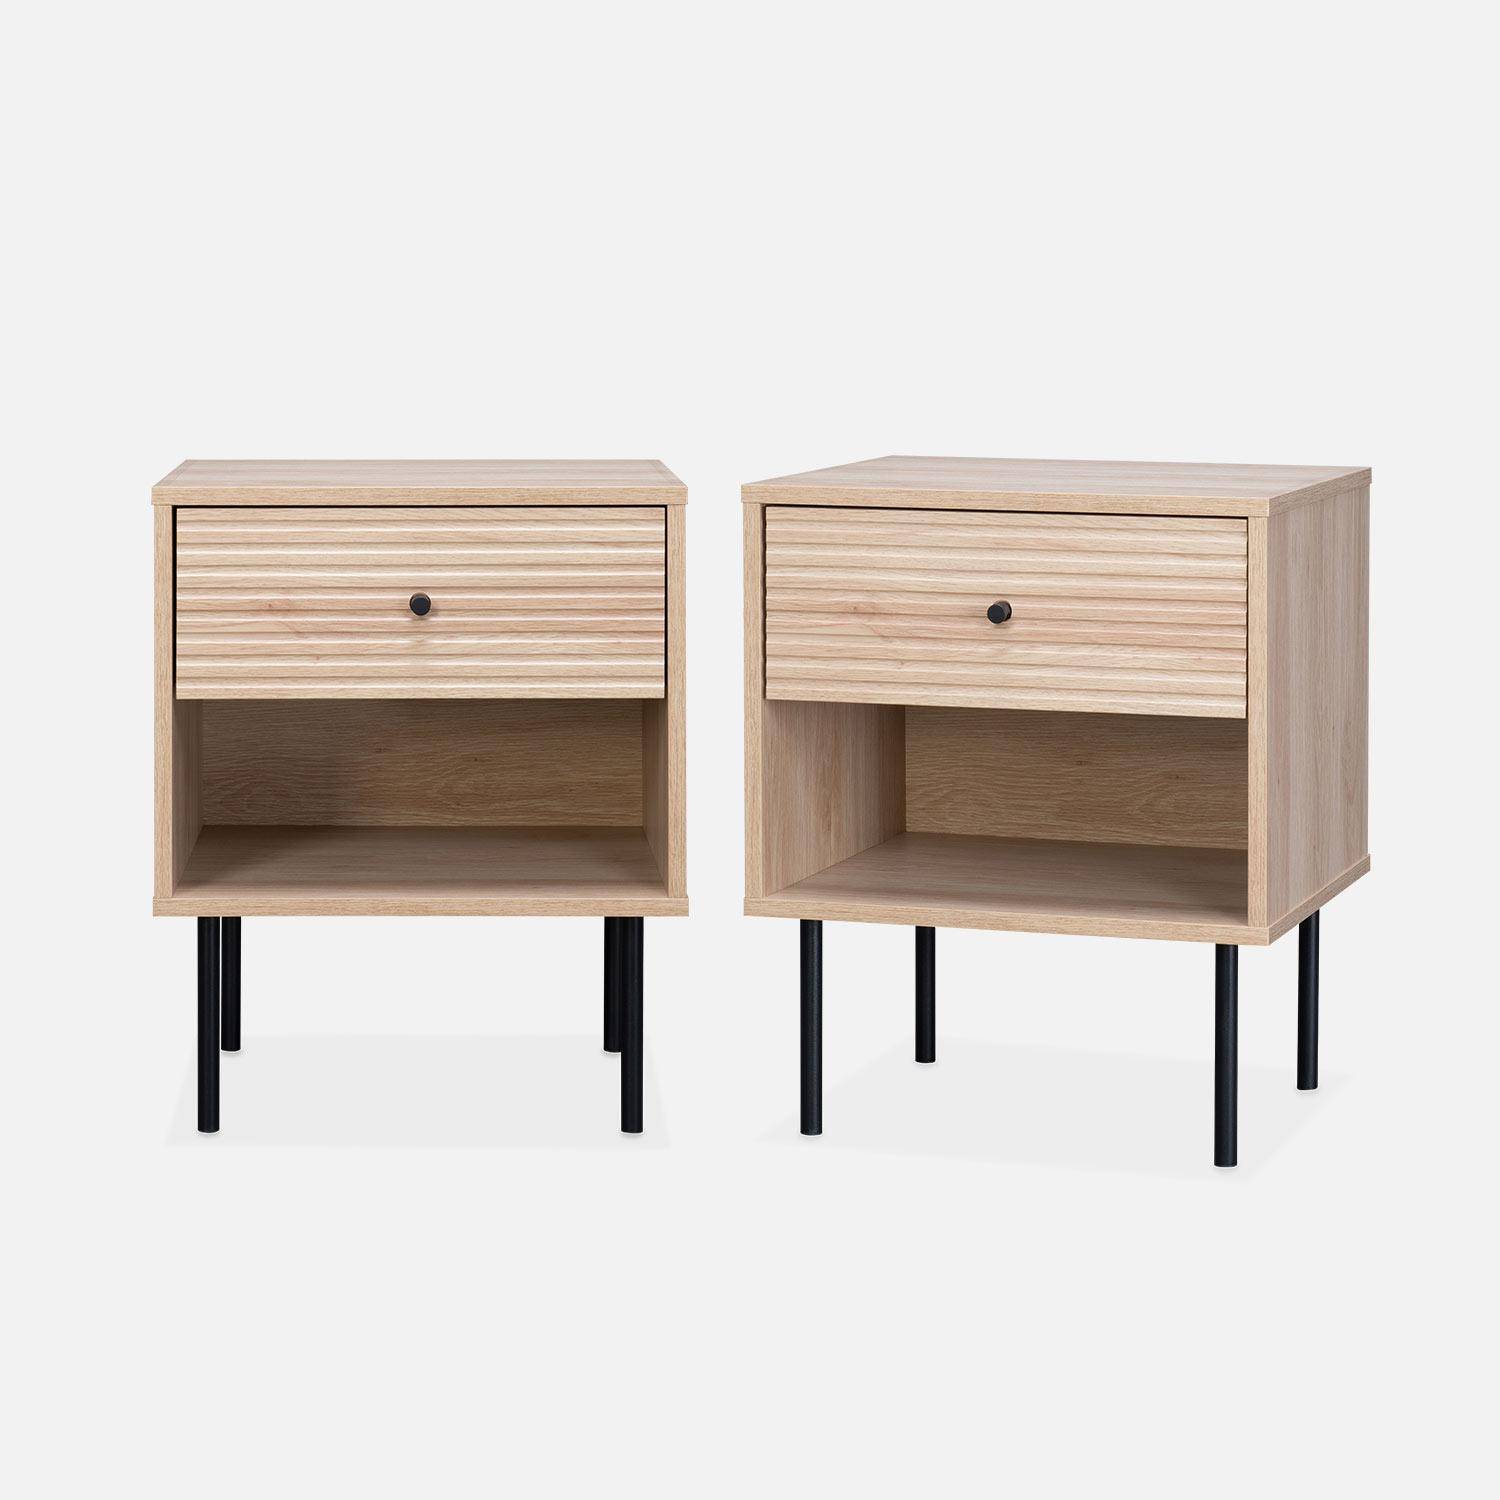 Set of 2 grooved wood effect bedside table, natural, L45xW39.5xH55.5cm,sweeek,Photo3